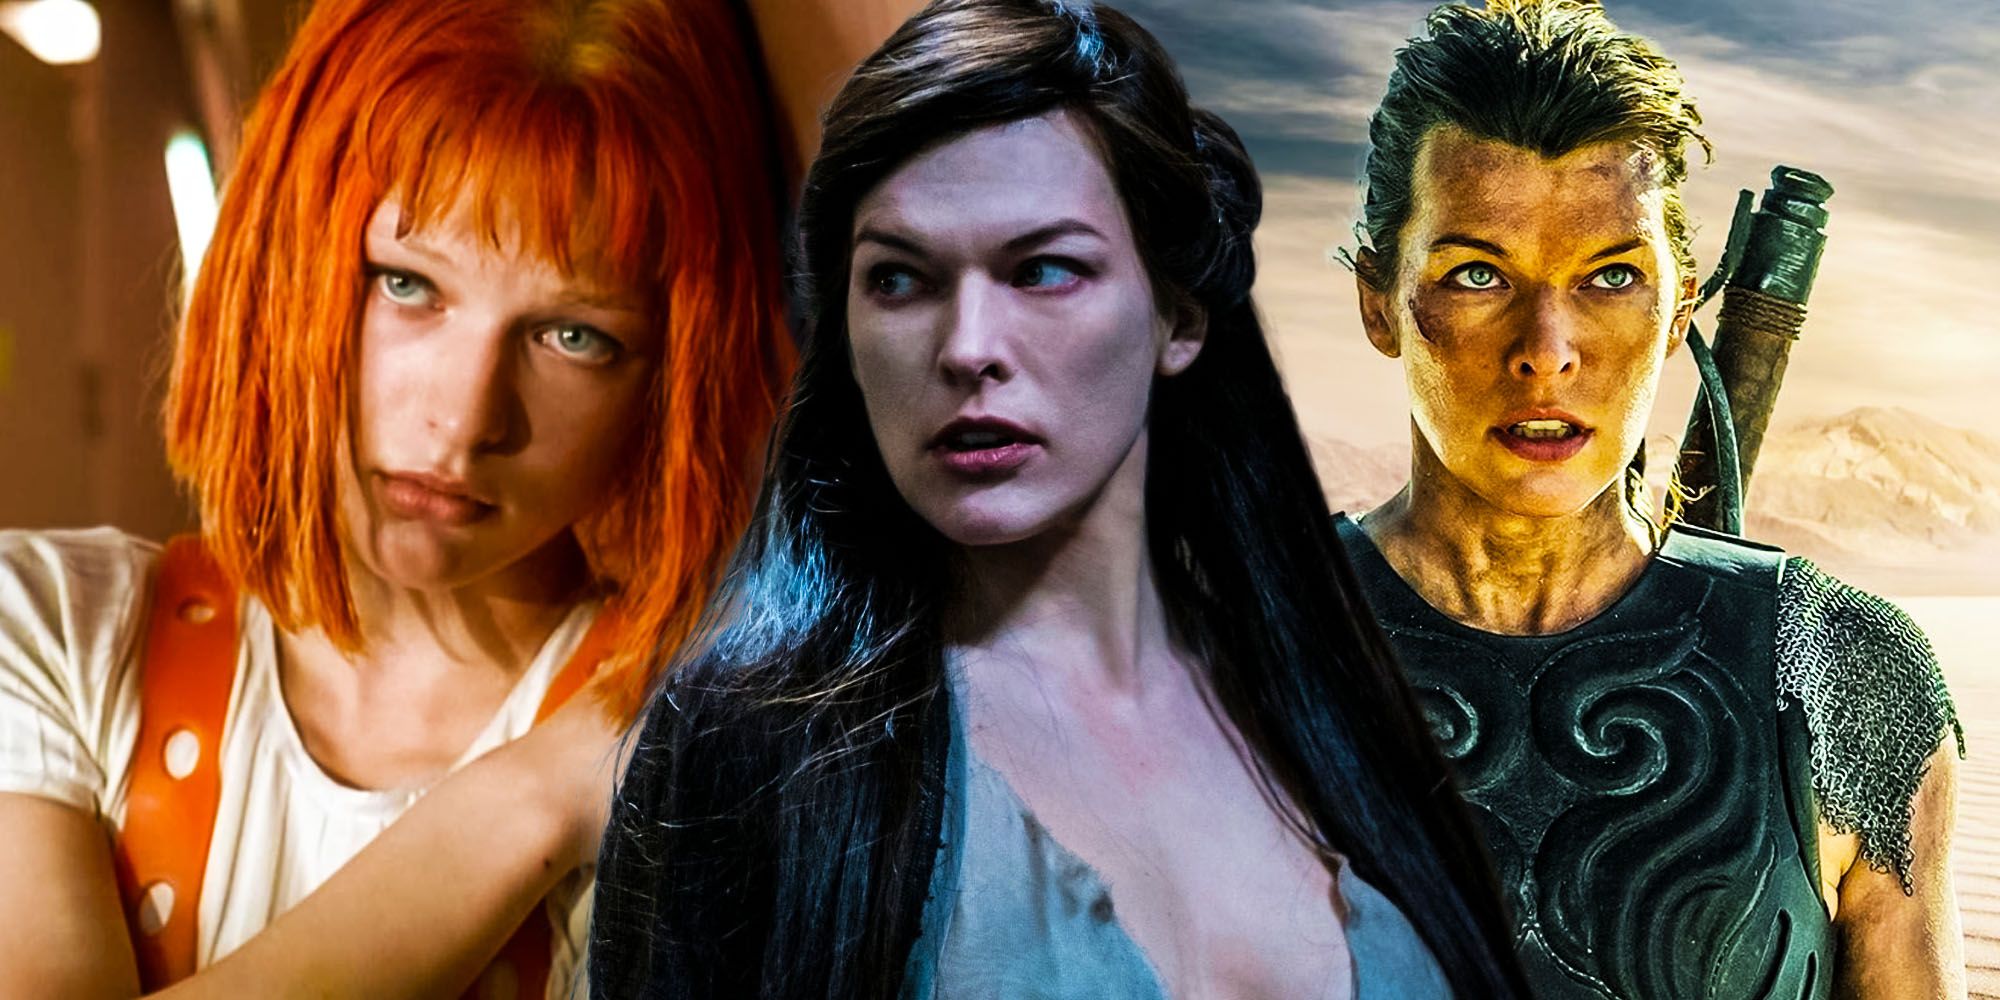 Every Milla Jovovich Action Movie Ranked From Worst To Best